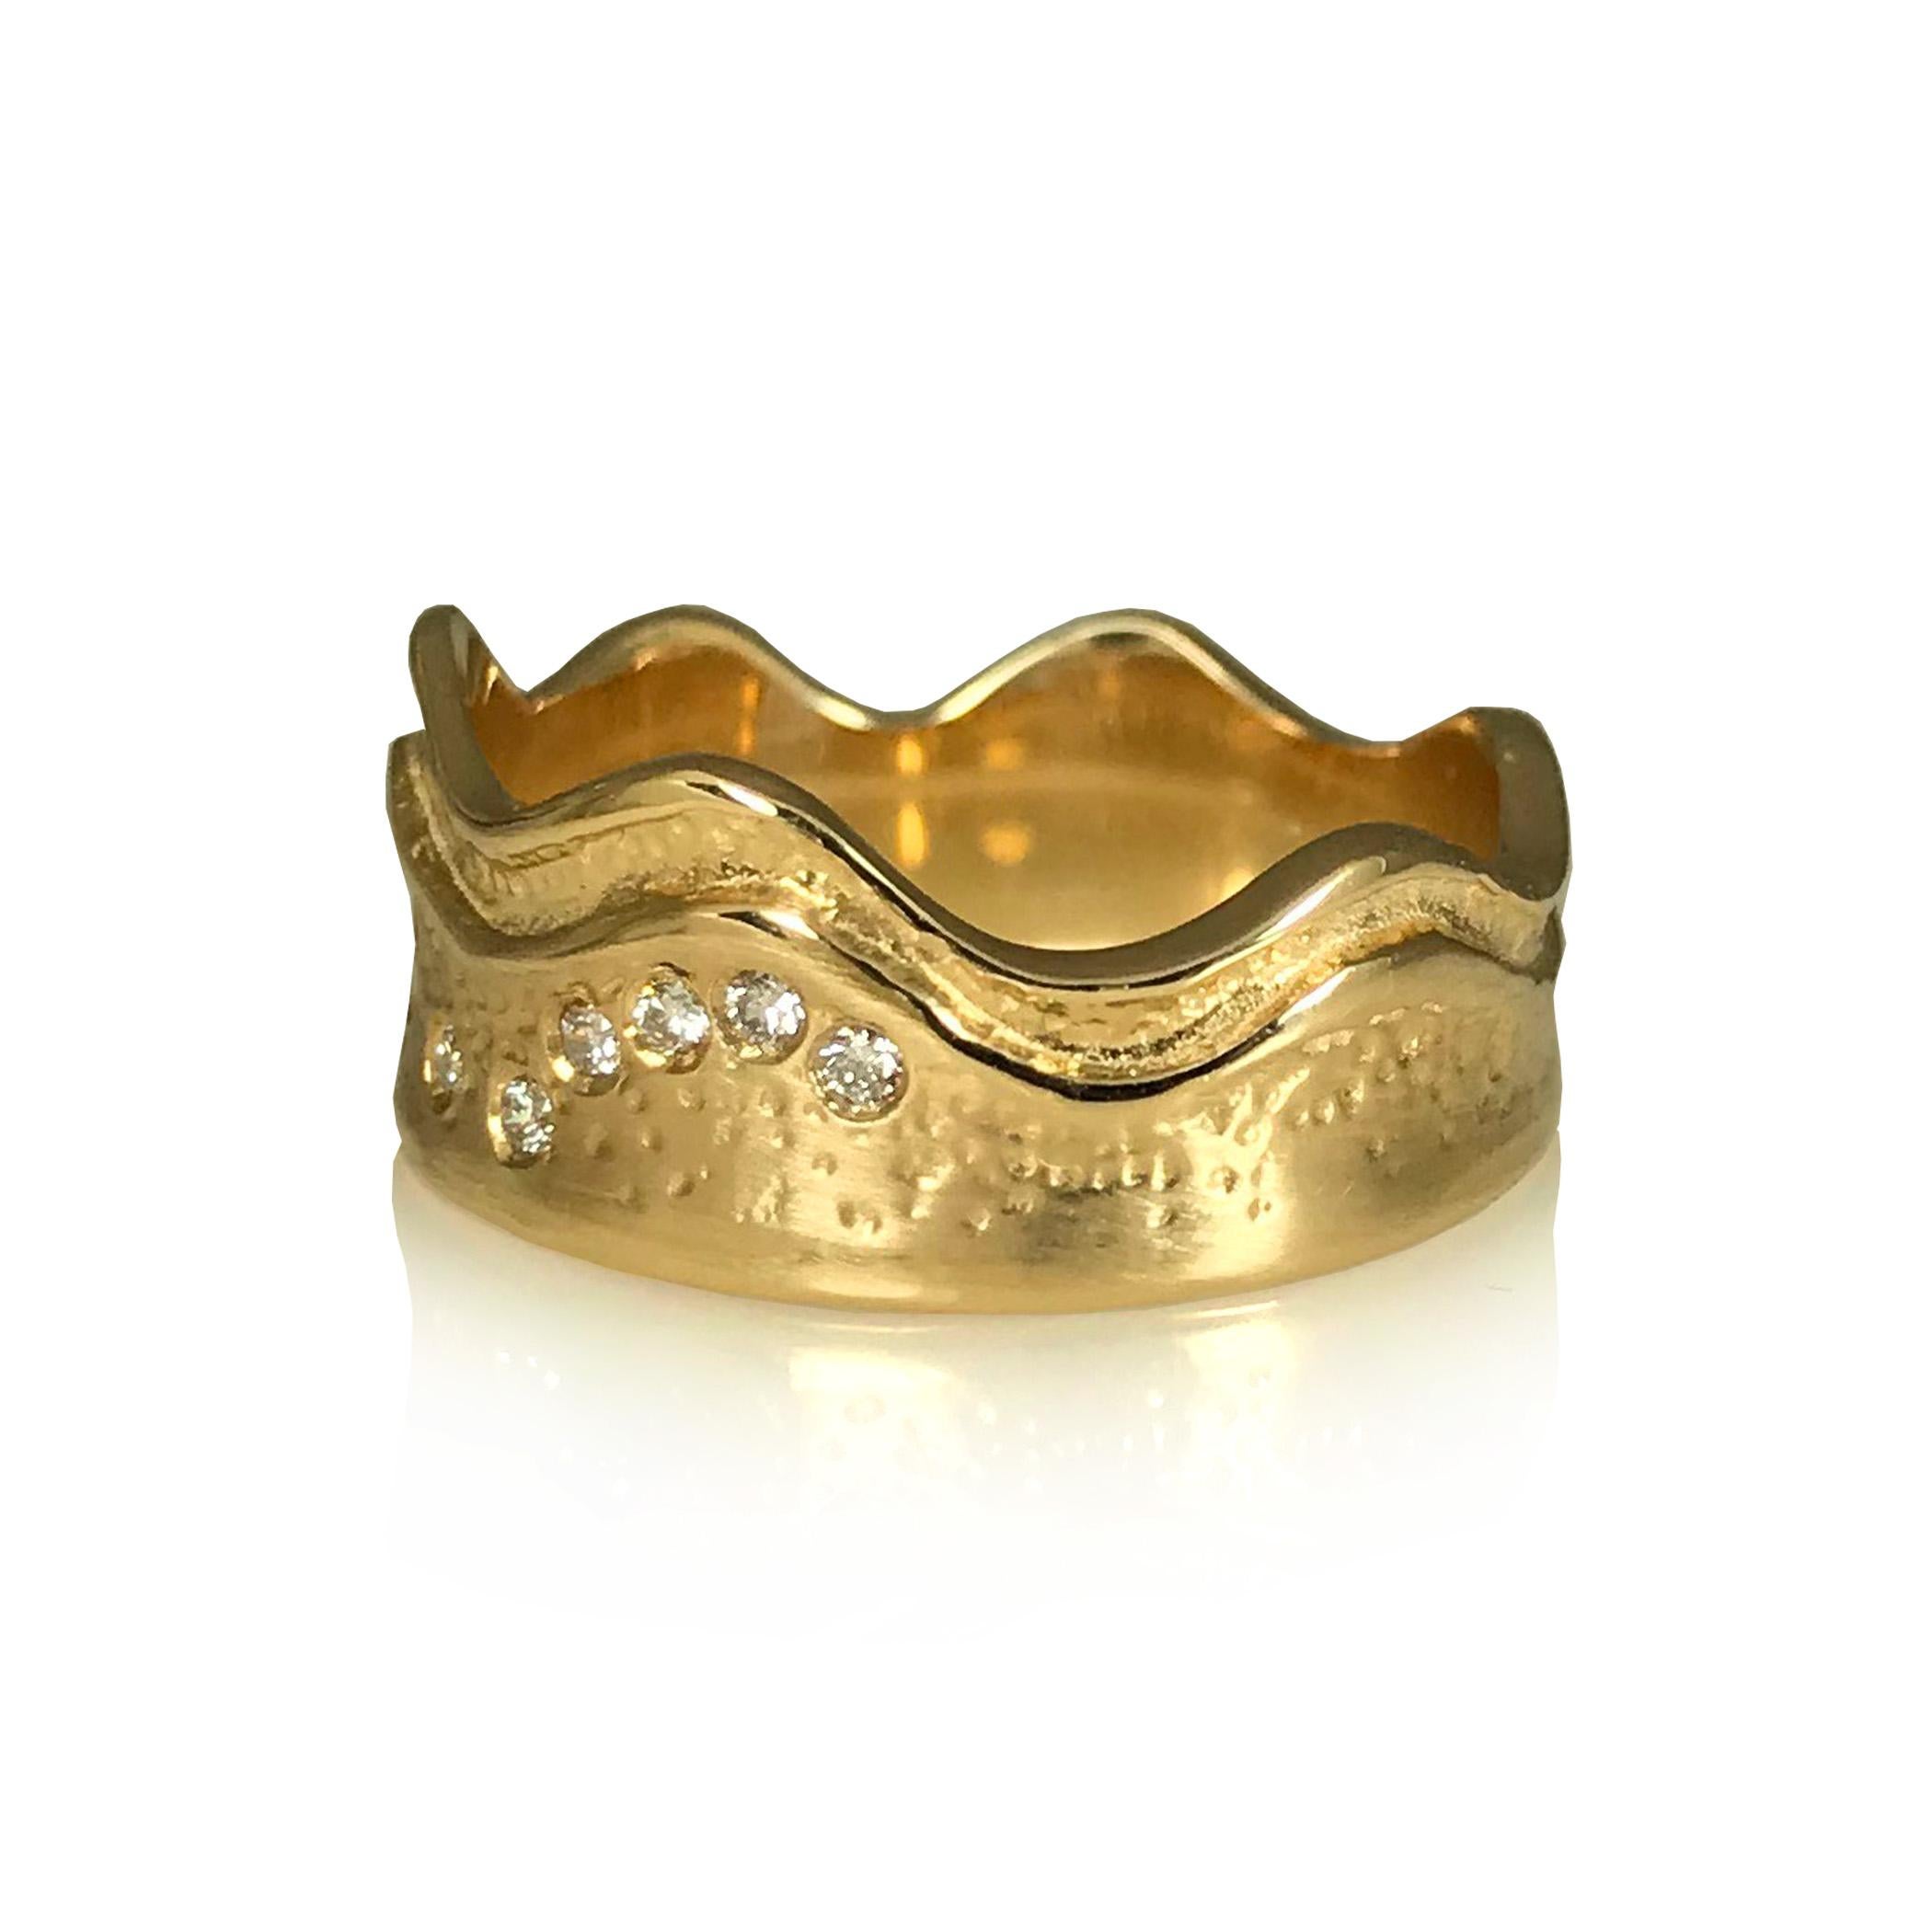 K.Mita's Tidal Ring is shaped like a wave running along the sandy shorline that rises and falls with the tides. It is handmade from 14K Yellow Gold and varies in width from 5.0 - 9.0mm. Sprinkled along the sandy shore are 0.07ct of diamonds. 
Please